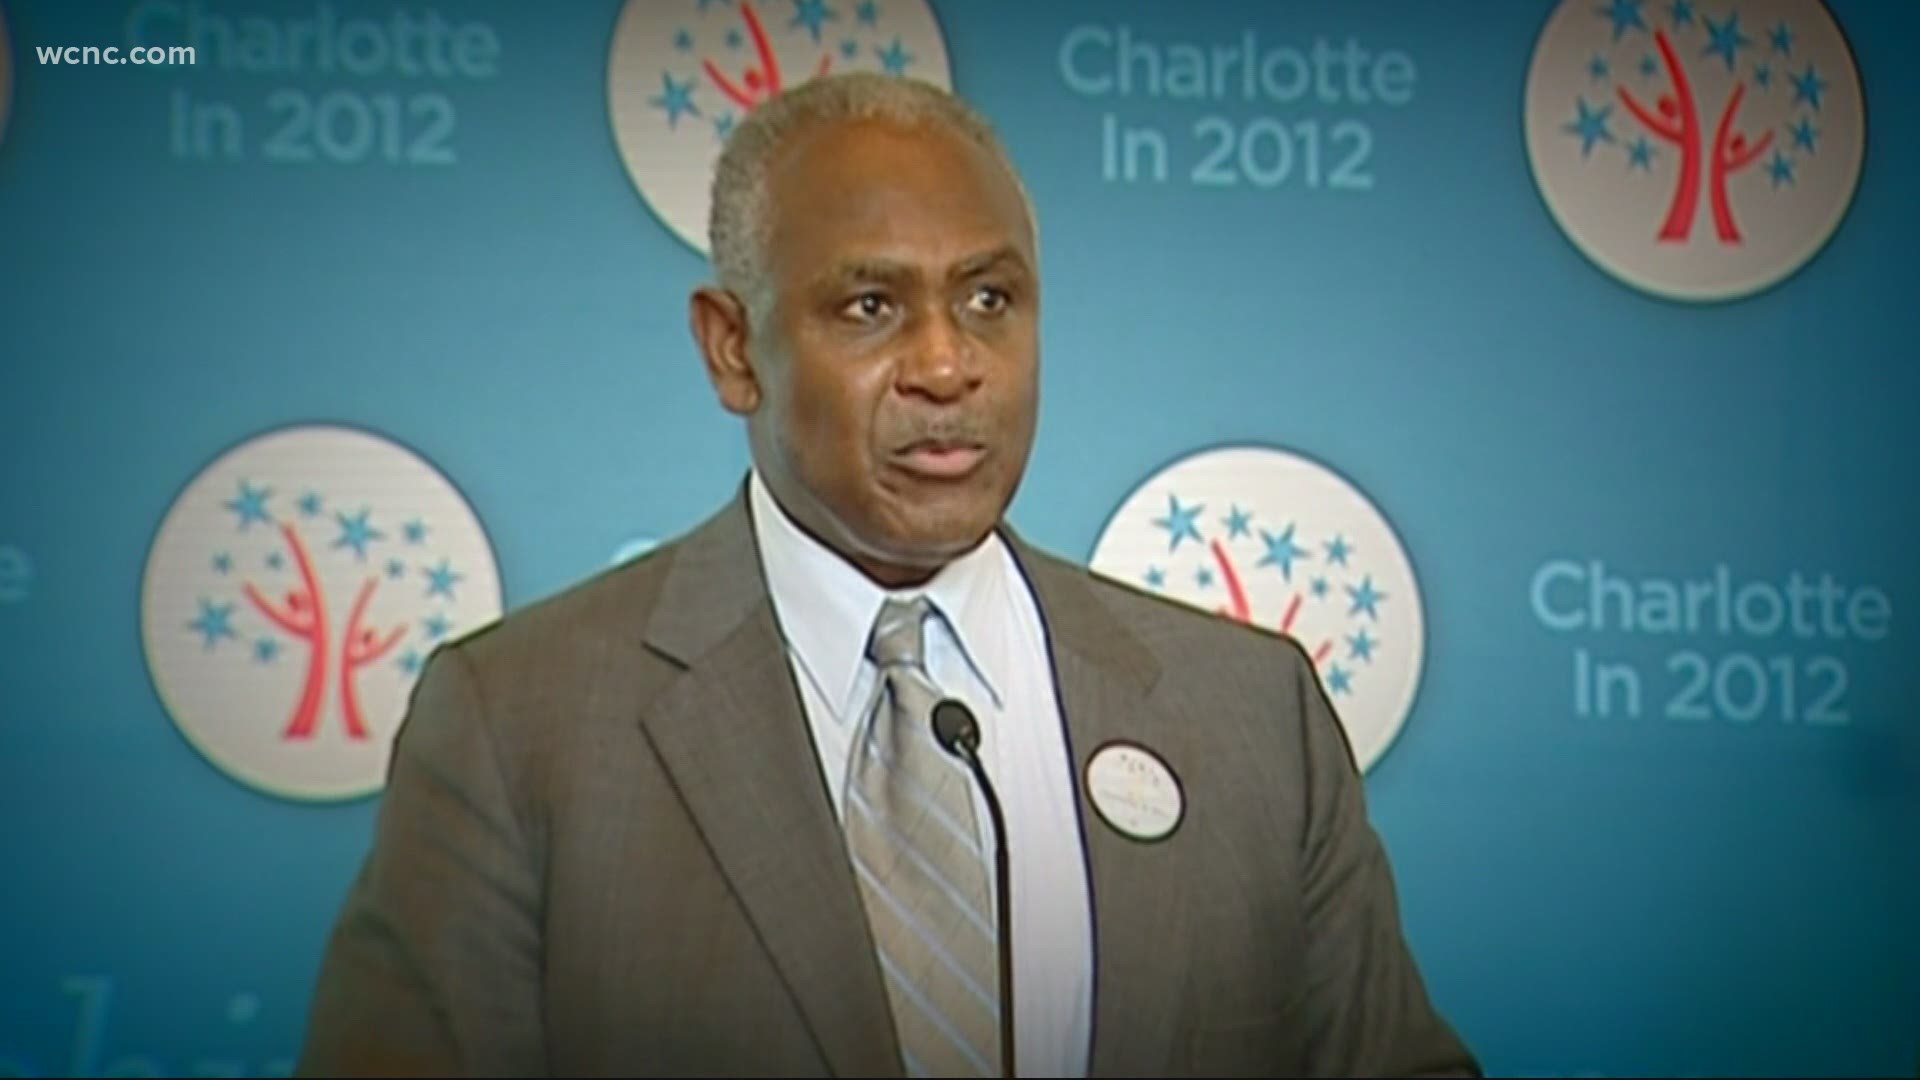 Harvey Gantt served nearly a decade on Charlotte city council before becoming the city's first Black mayor in 1983.